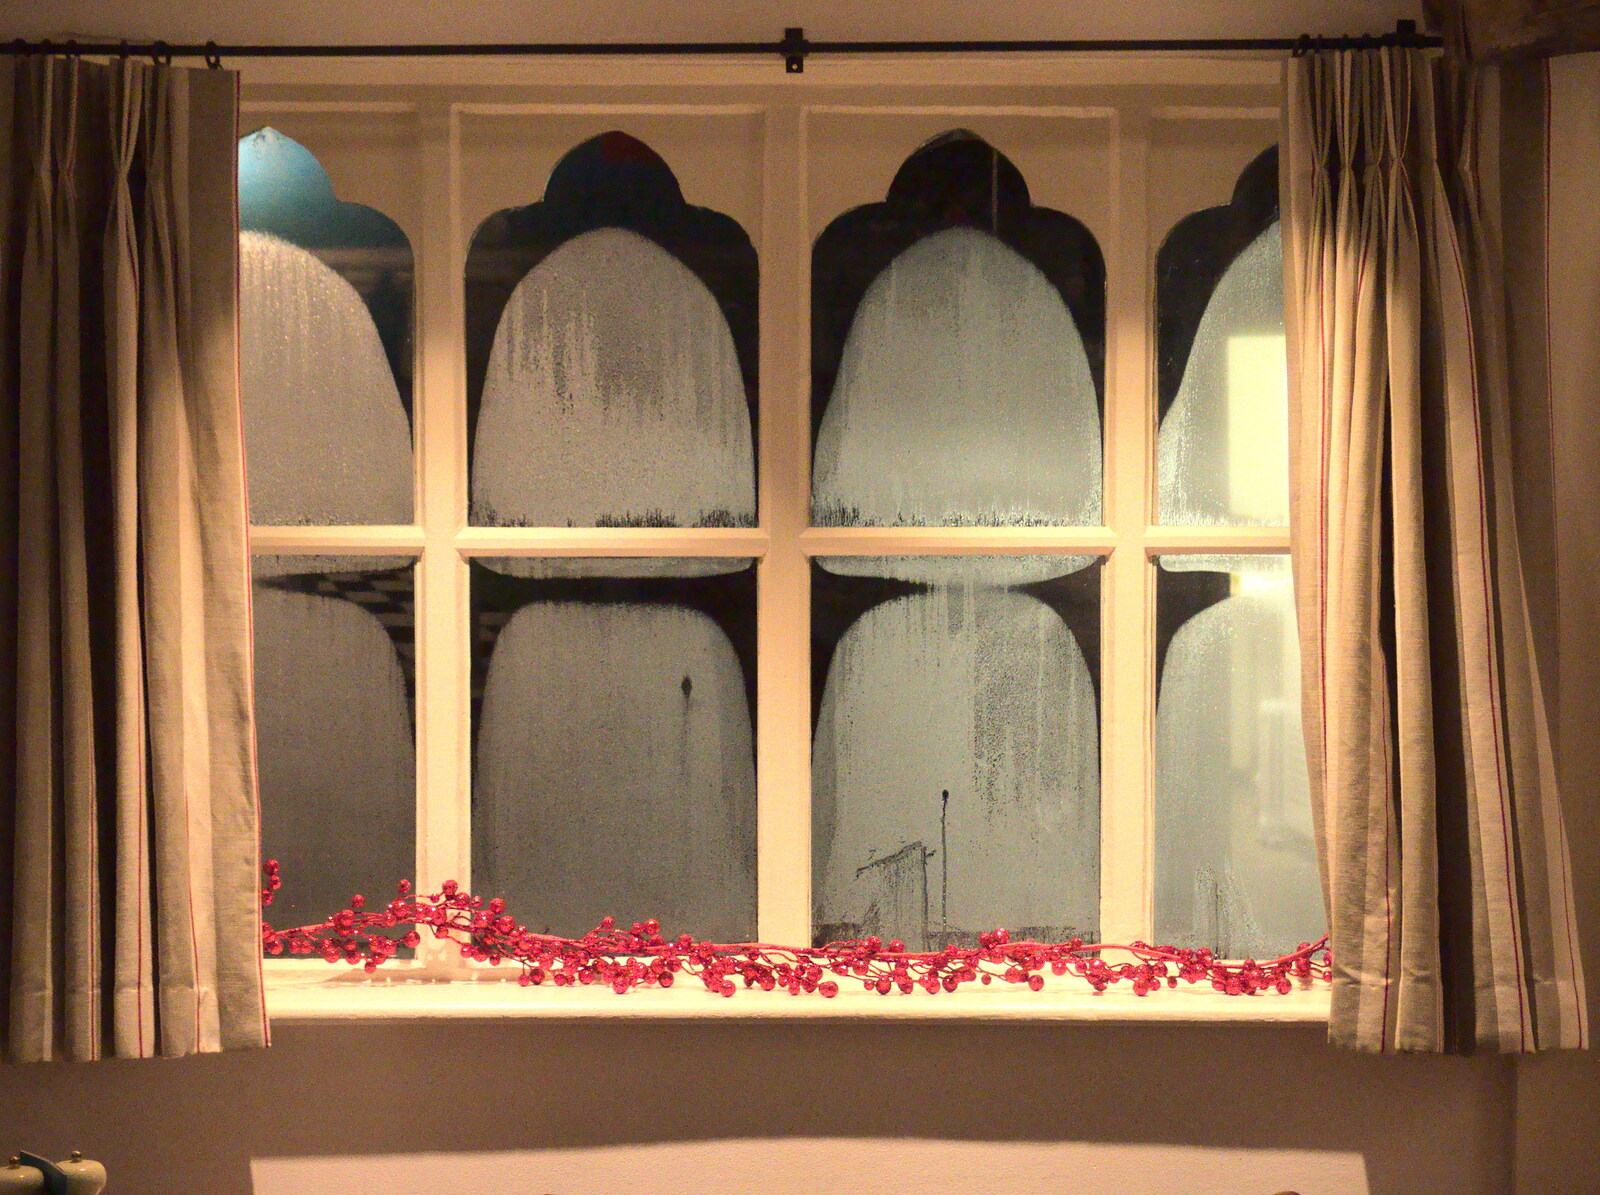 The windows are all steamed up from New Year's Eve at the Oaksmere, Brome, Suffolk - 31st December 2014